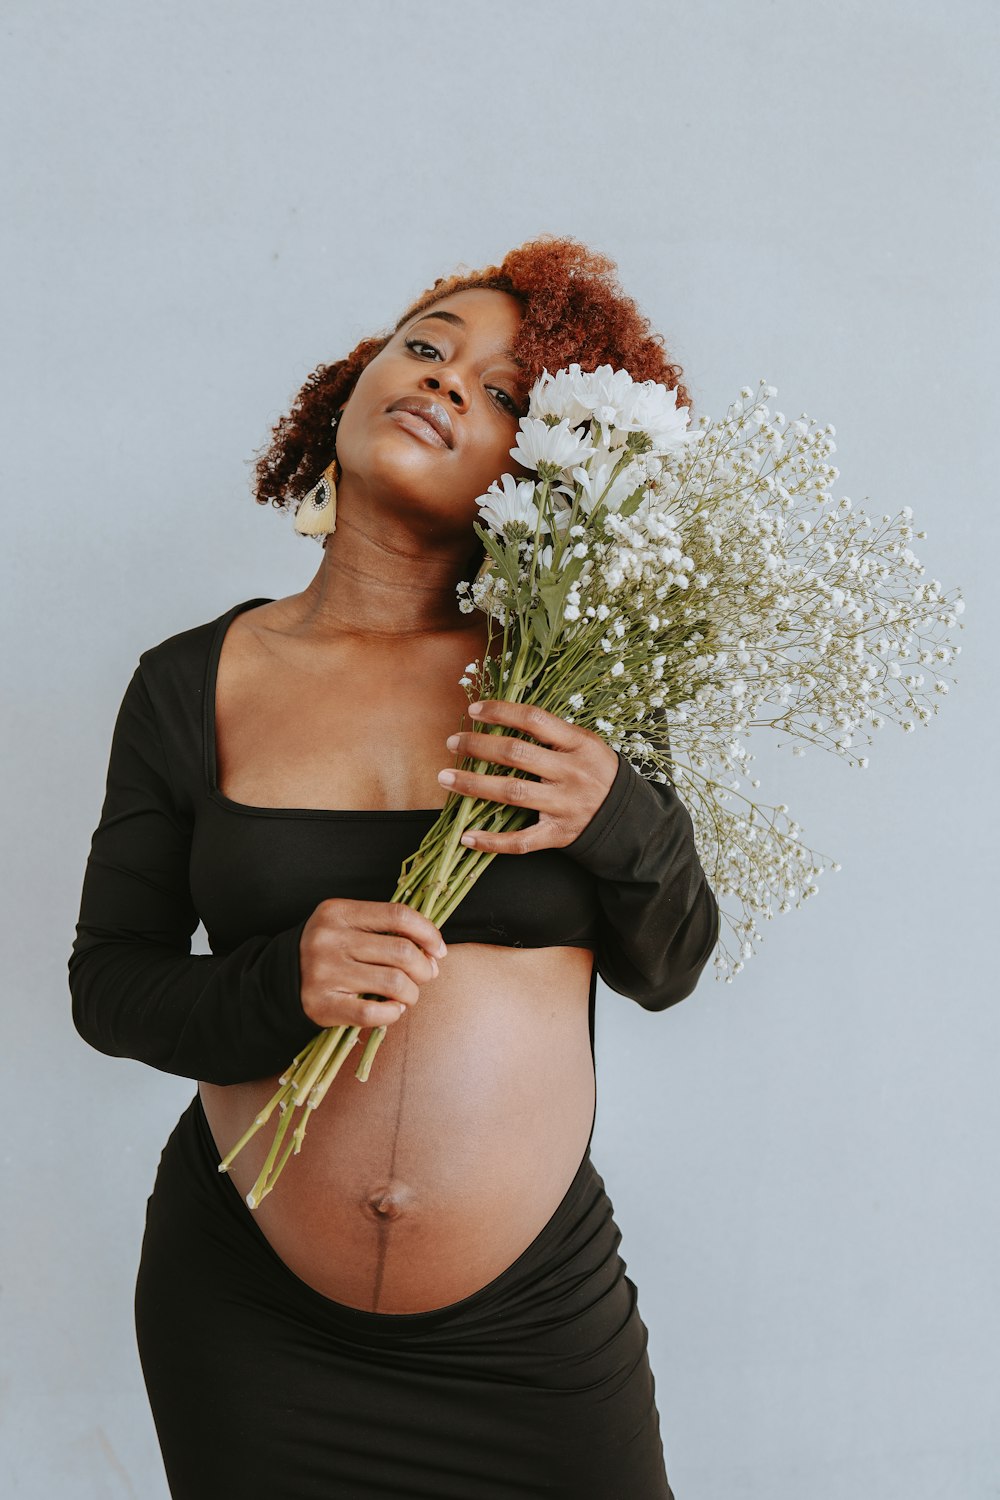 a pregnant woman holding a bouquet of flowers